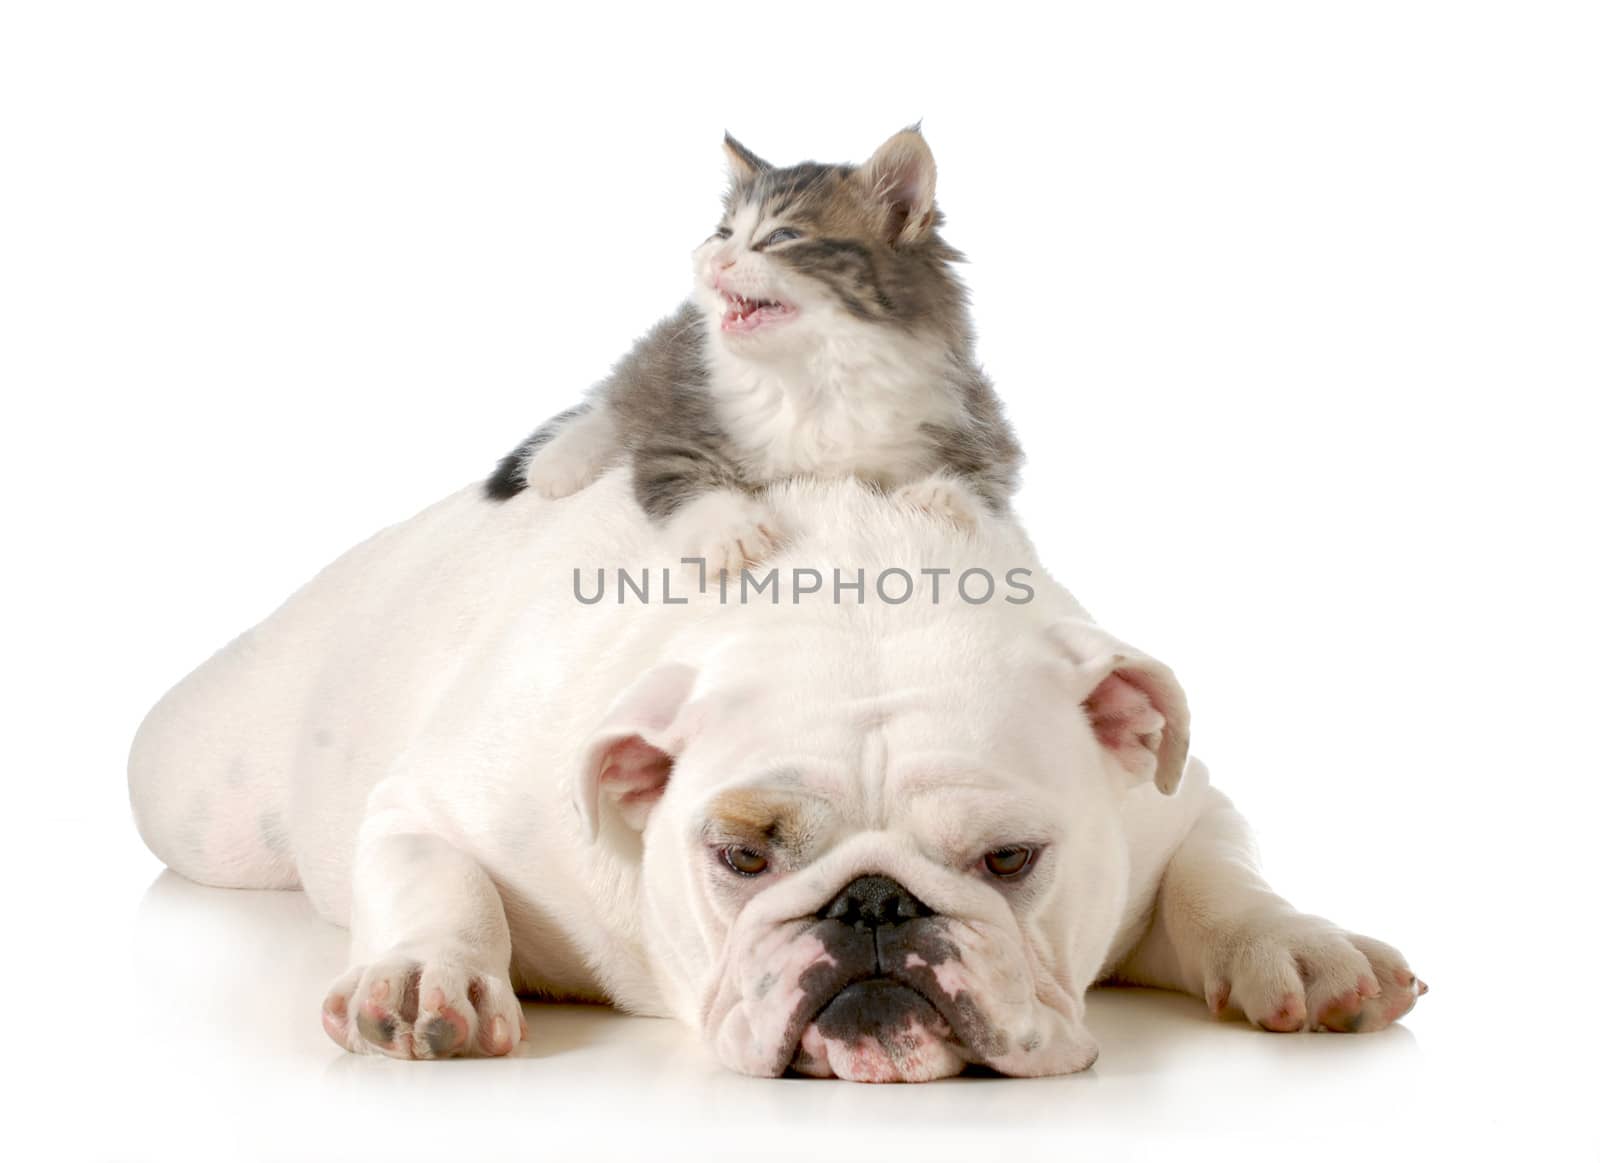 dog and cat - angry kitten laying on english bulldog's back isolated on white background